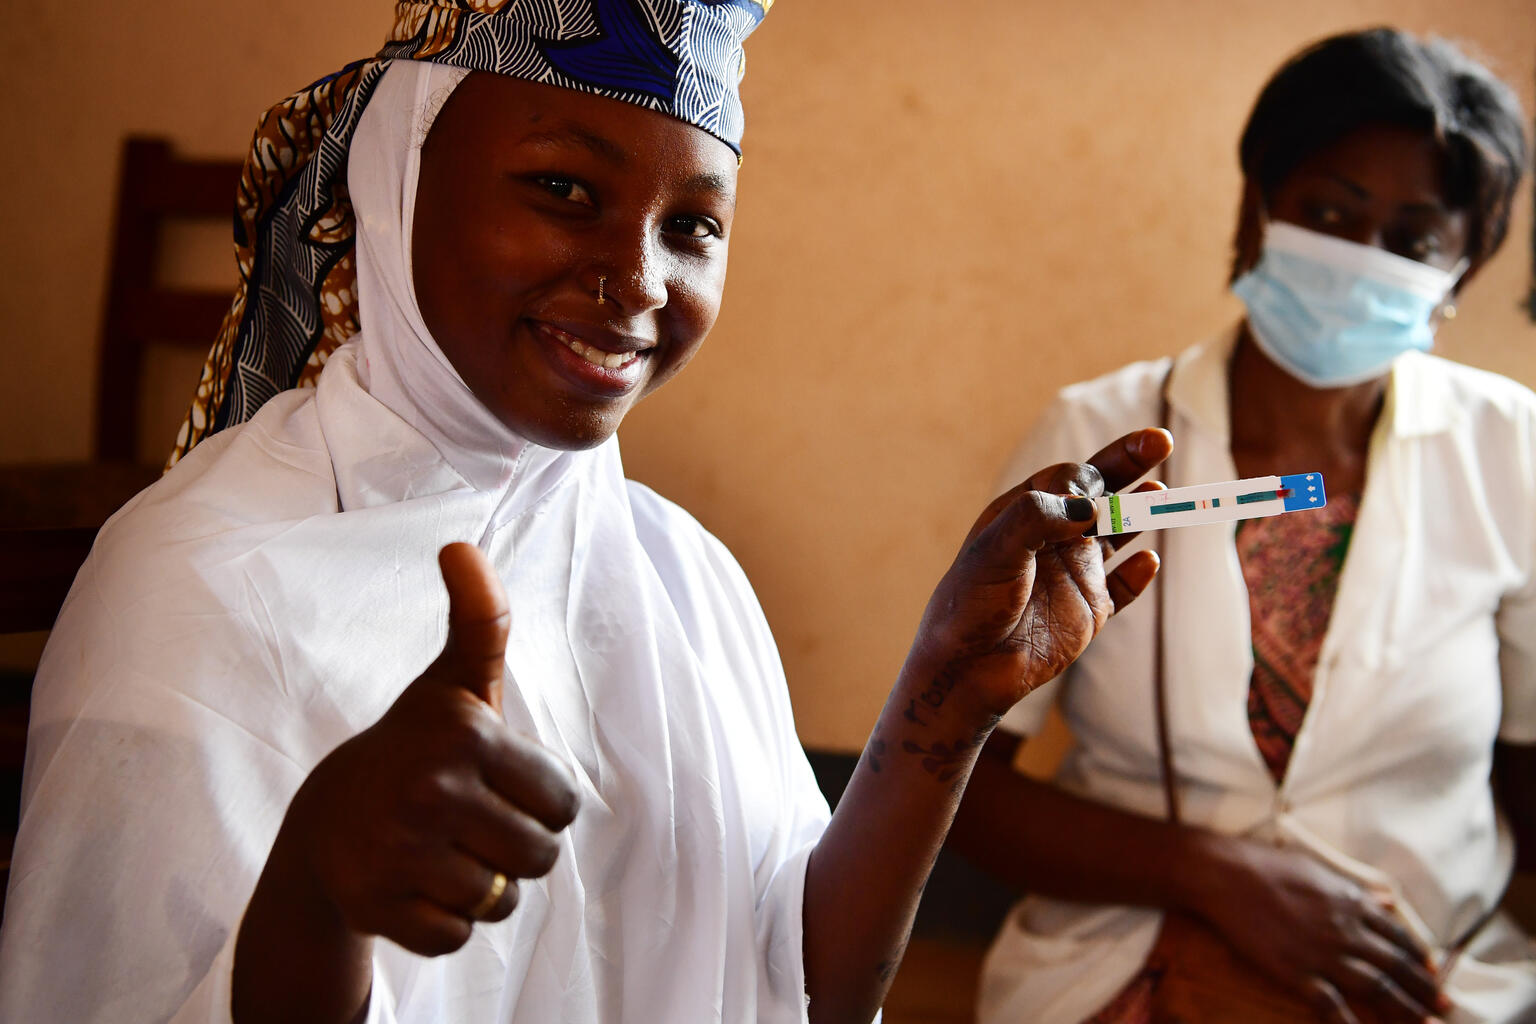 An adolescent girl poses with a test strip in Cameroon